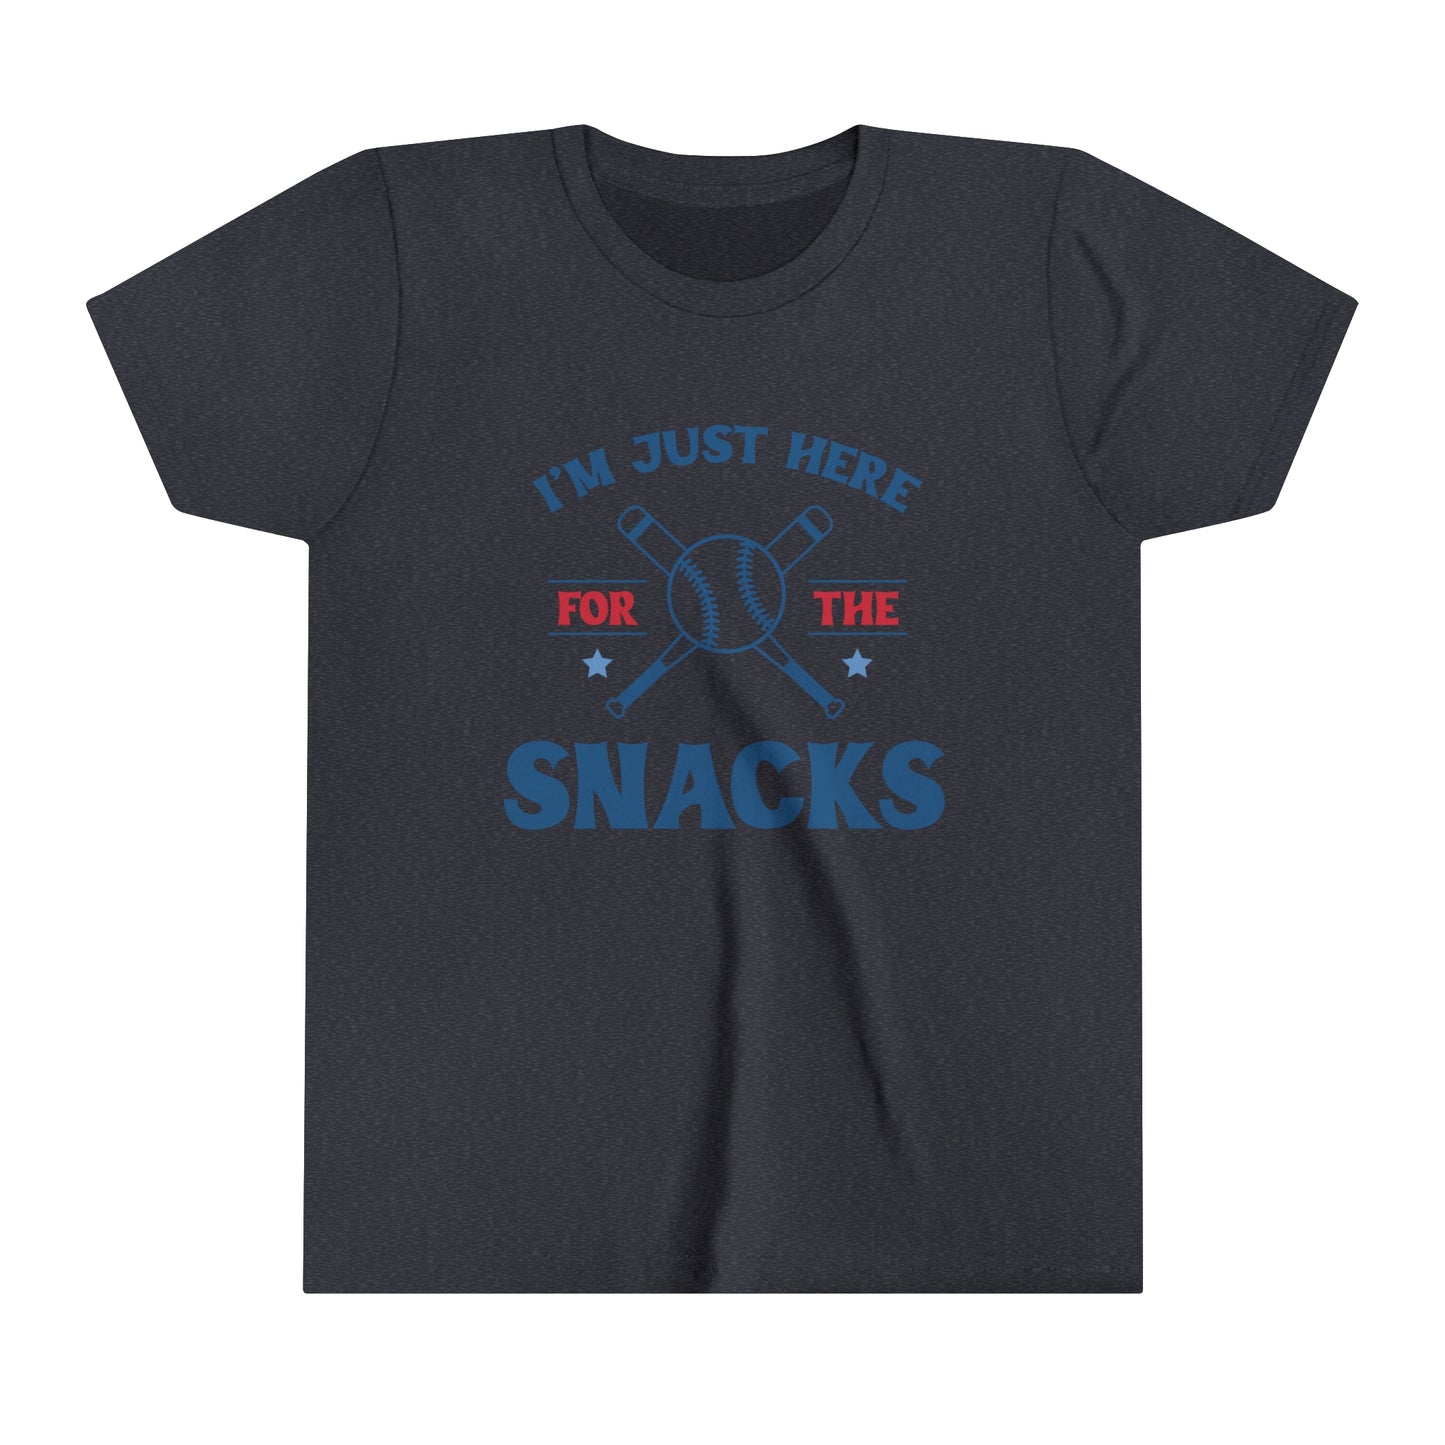 I'm Just Here For The Snacks Kid's Youth Baseball Shirt